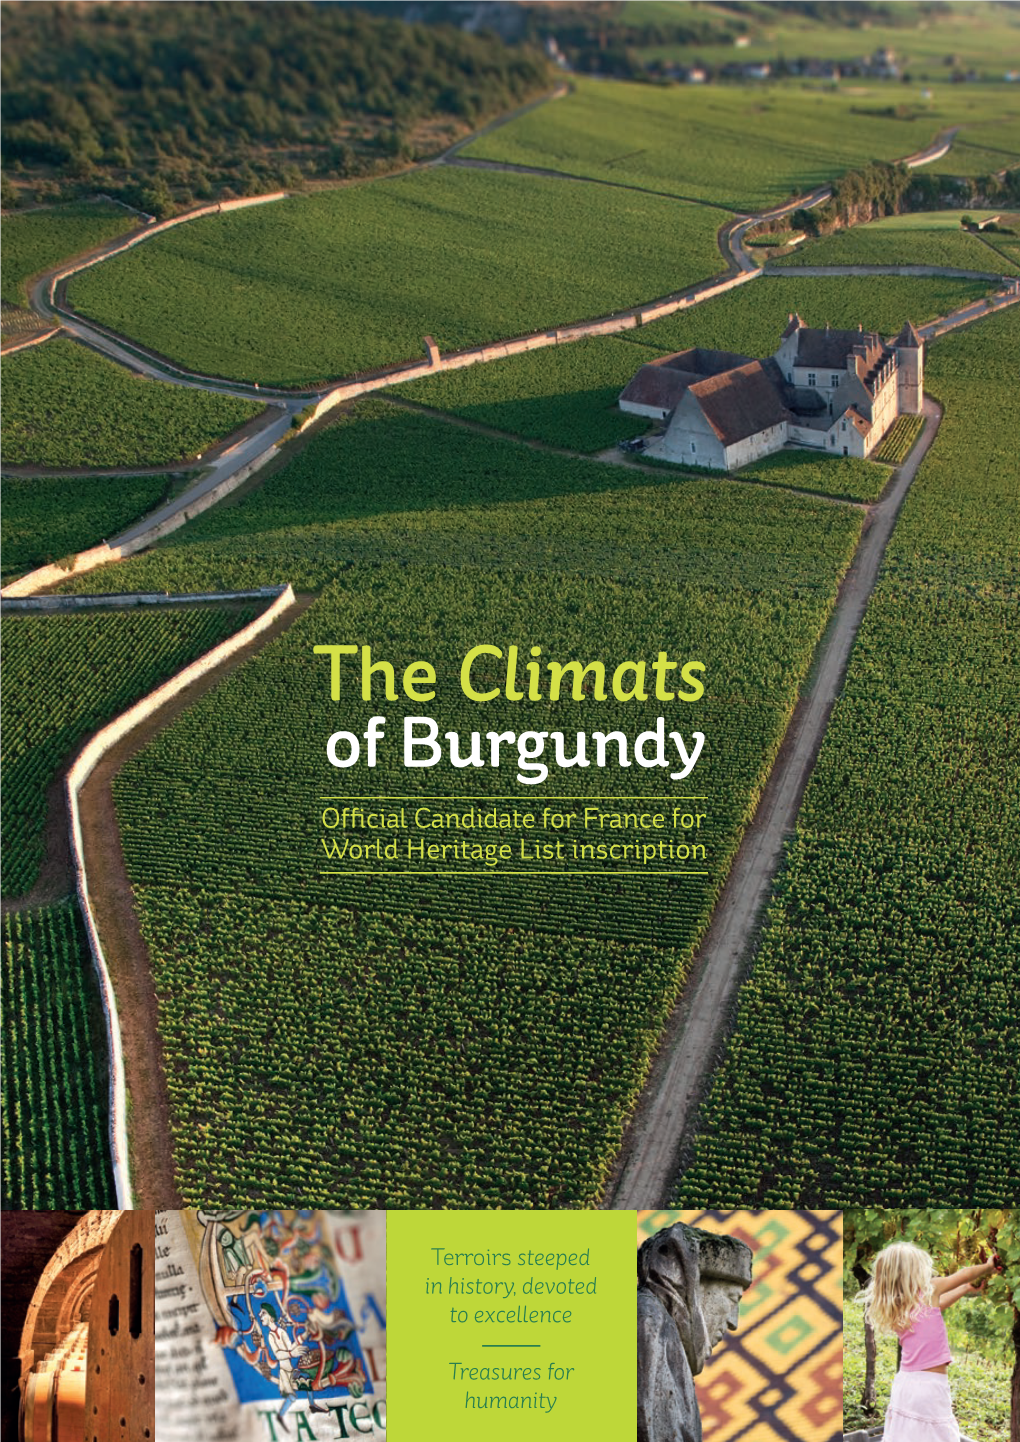 The Climats of Burgundy Official Candidate for France for World Heritage List Inscription